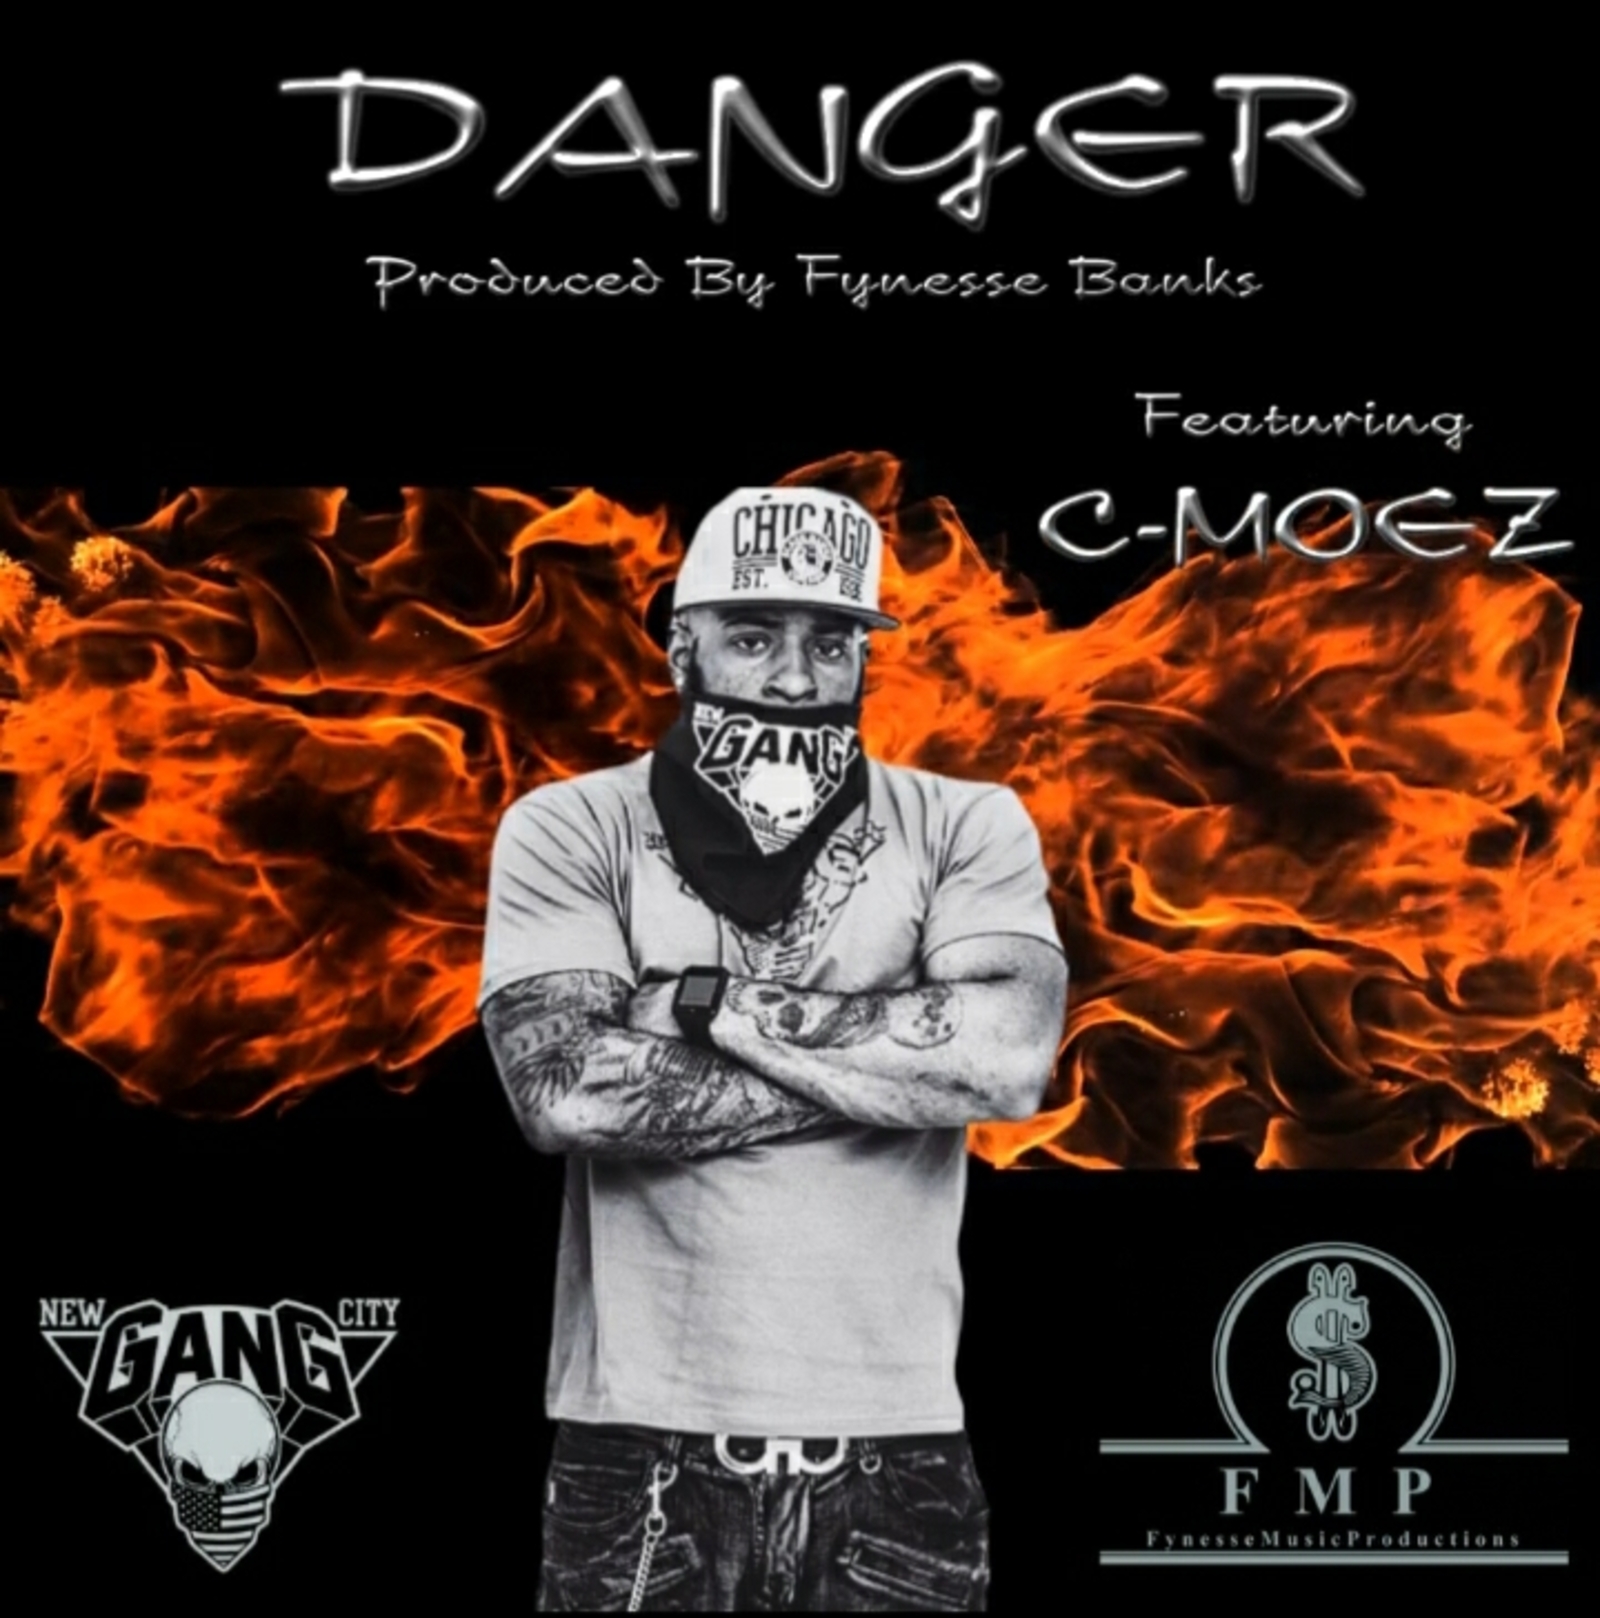 Art for Danger by featuring  C-Moez (Fynesse Banks)